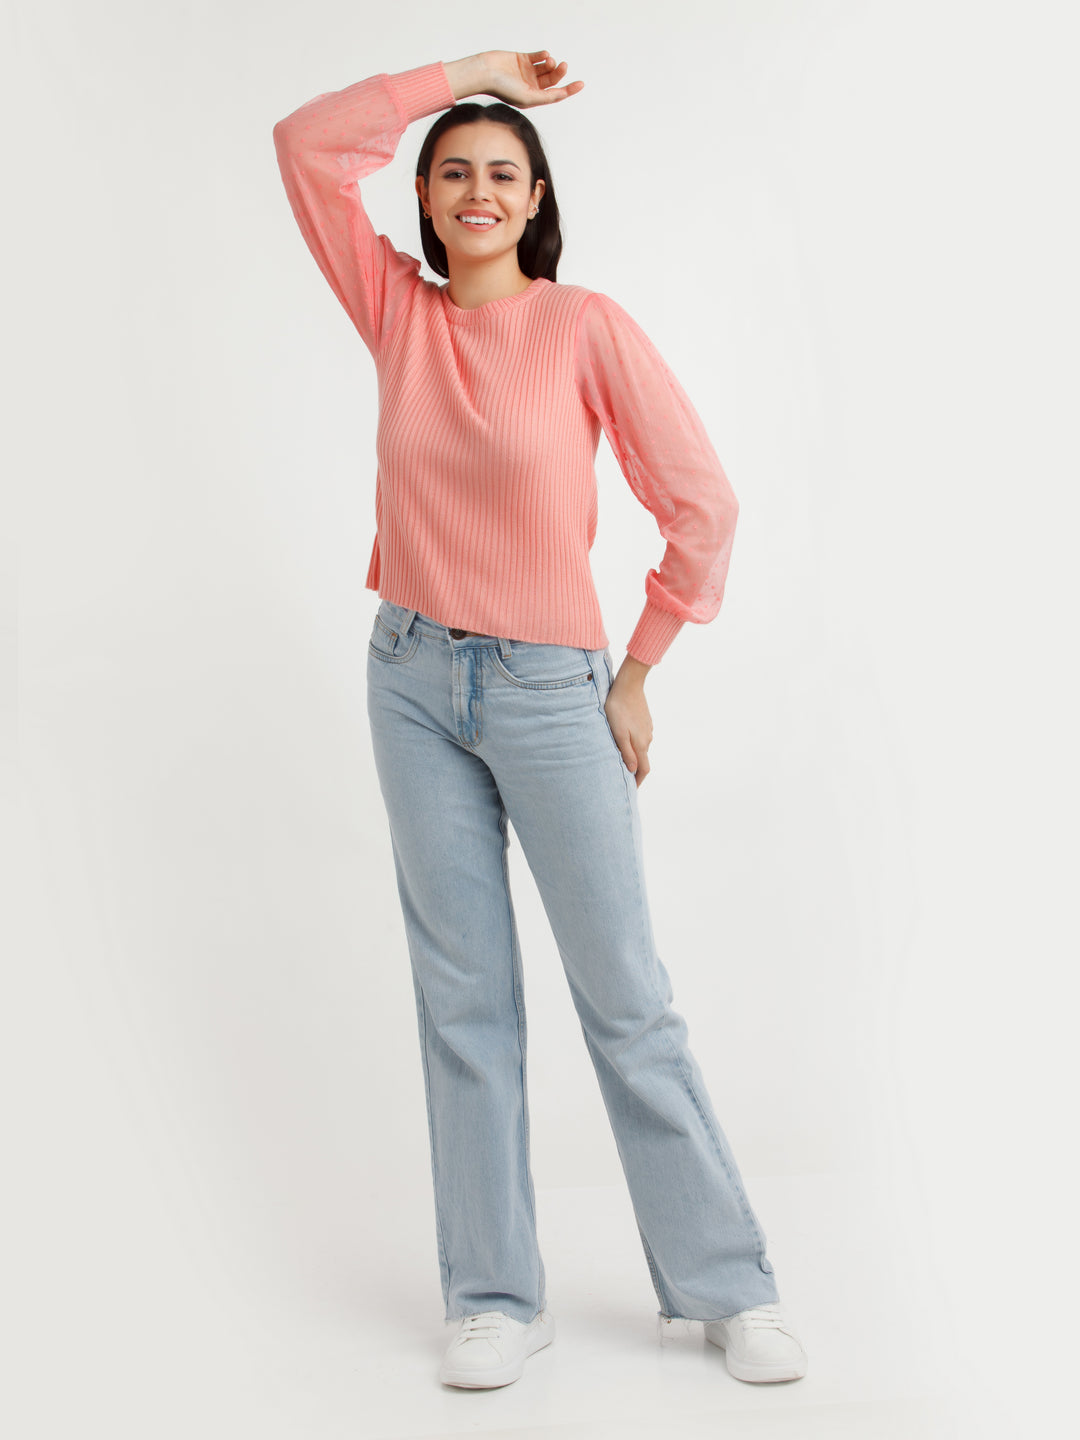 Coral Solid Sweater For Women